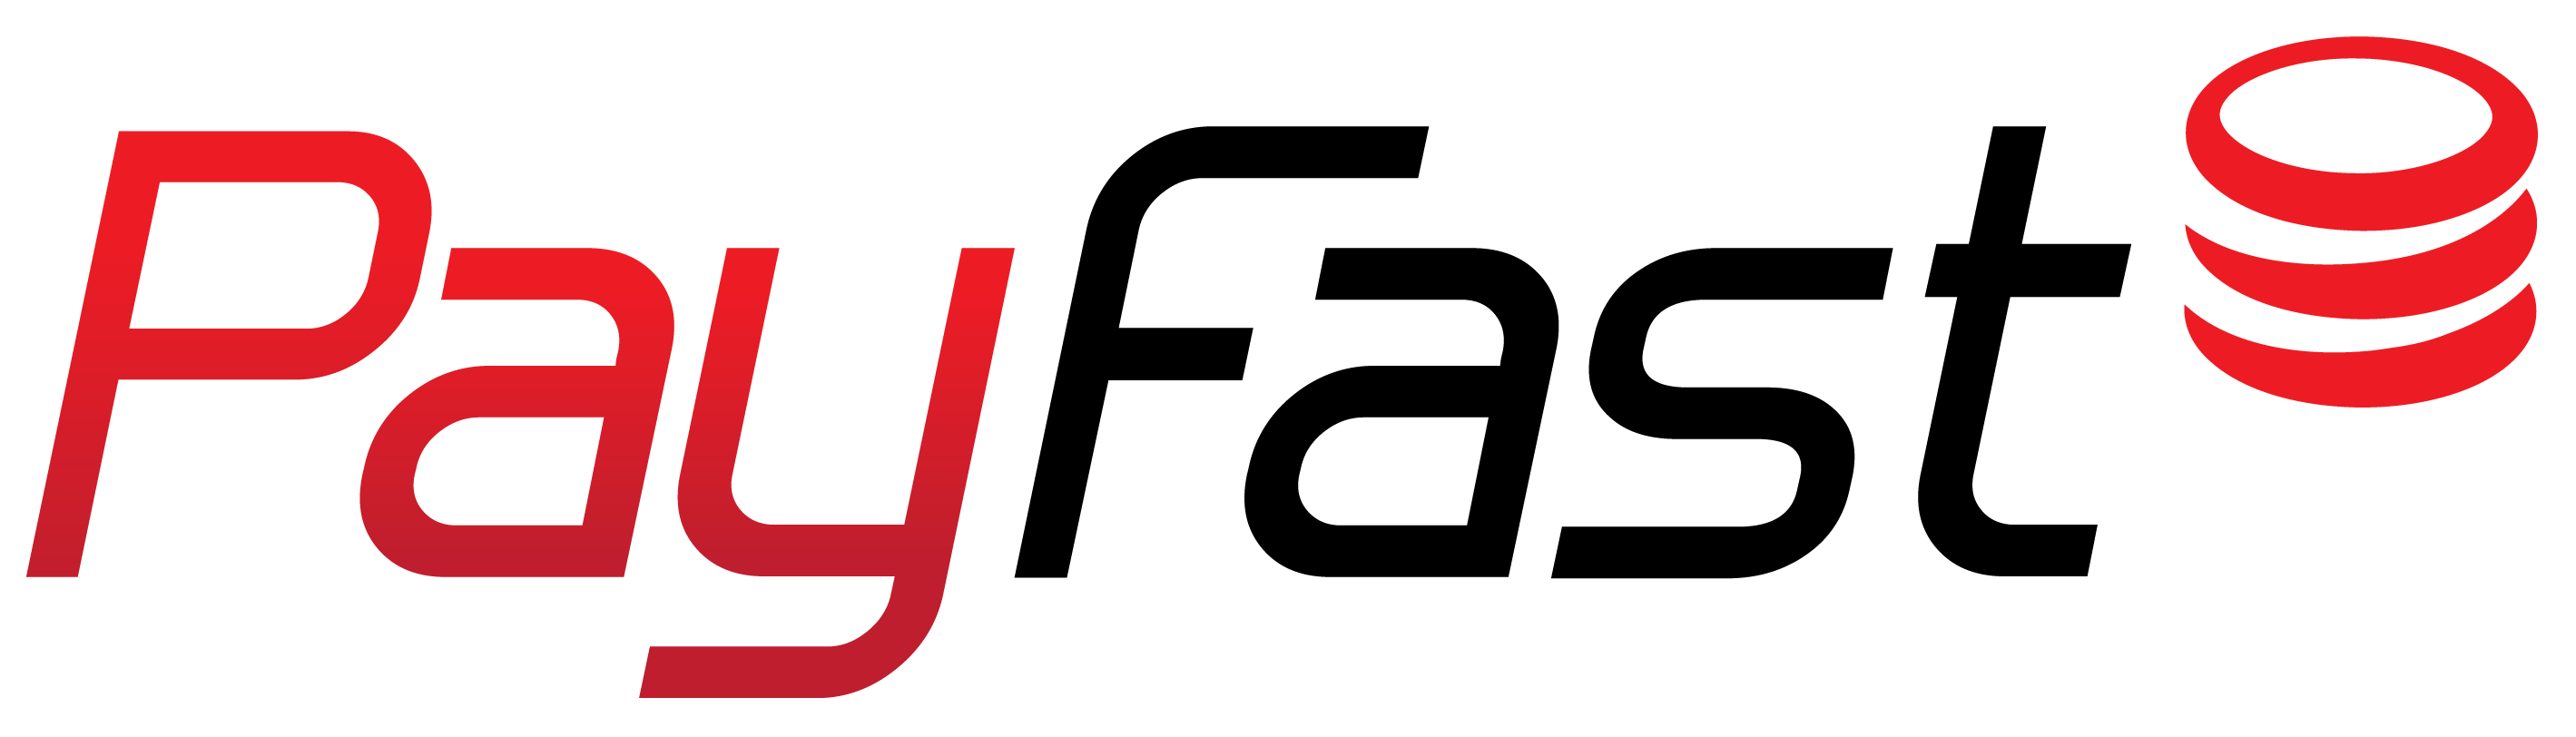 Pay Online Logo - South Africa's Secure Online Payment Gateway | PayFast